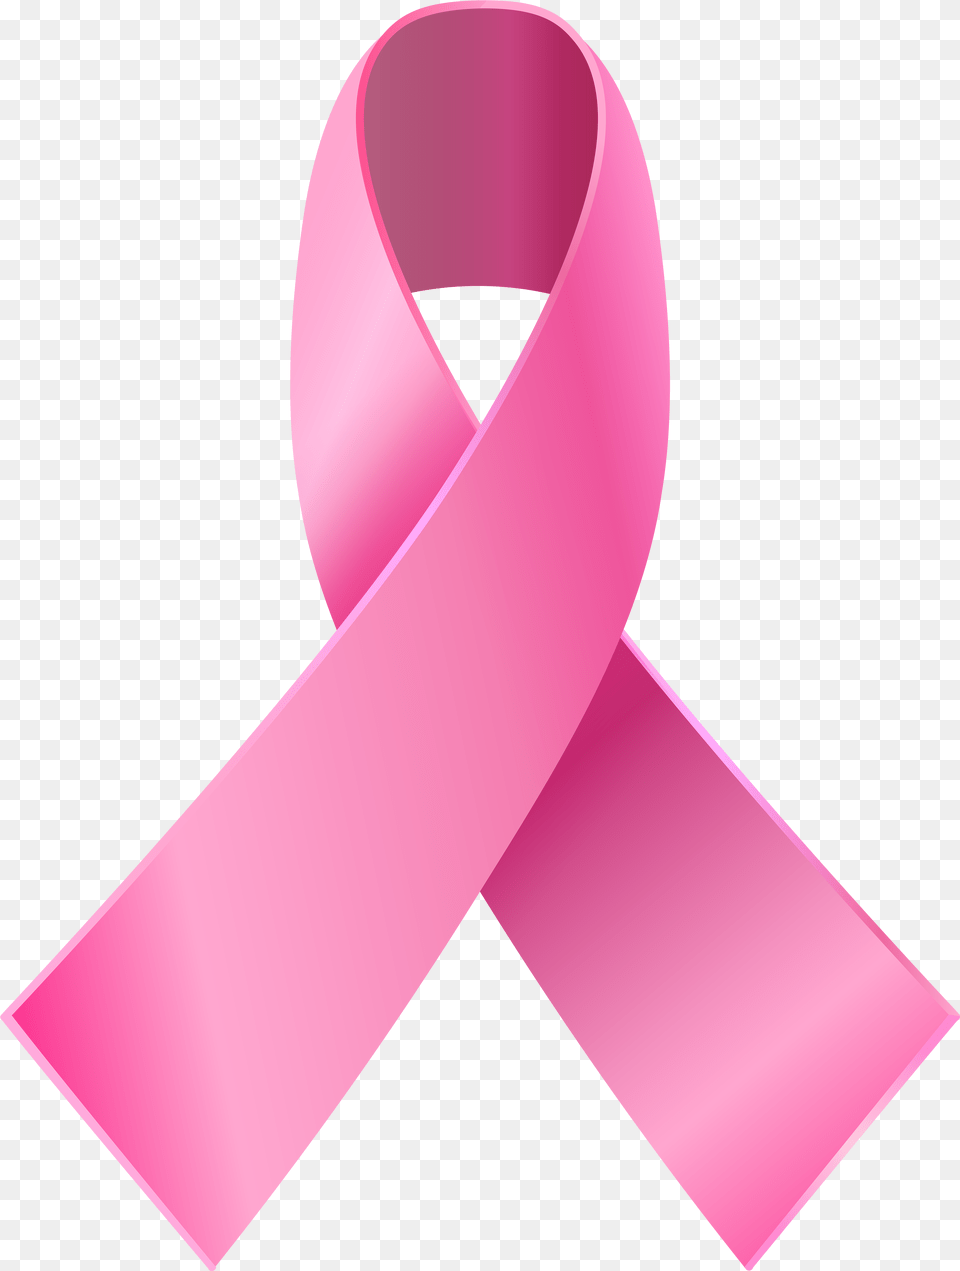 Pink Awareness Ribbon Clip Art Breast Cancer Ribbon, Accessories, Formal Wear, Tie, Belt Png Image